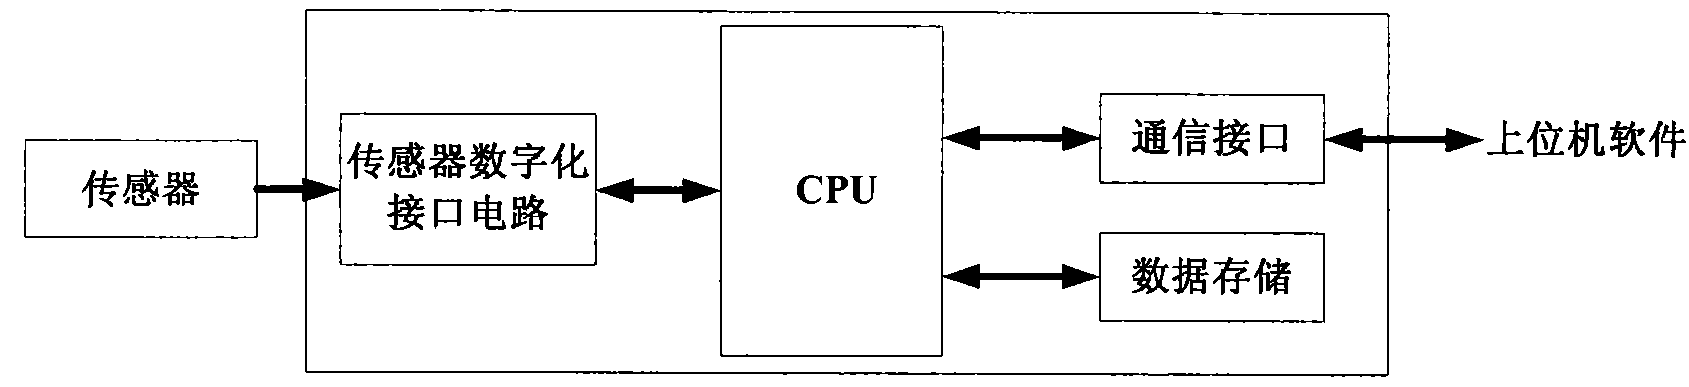 Method for conducting pressure calibration on diffused silicon sensors through upper computer